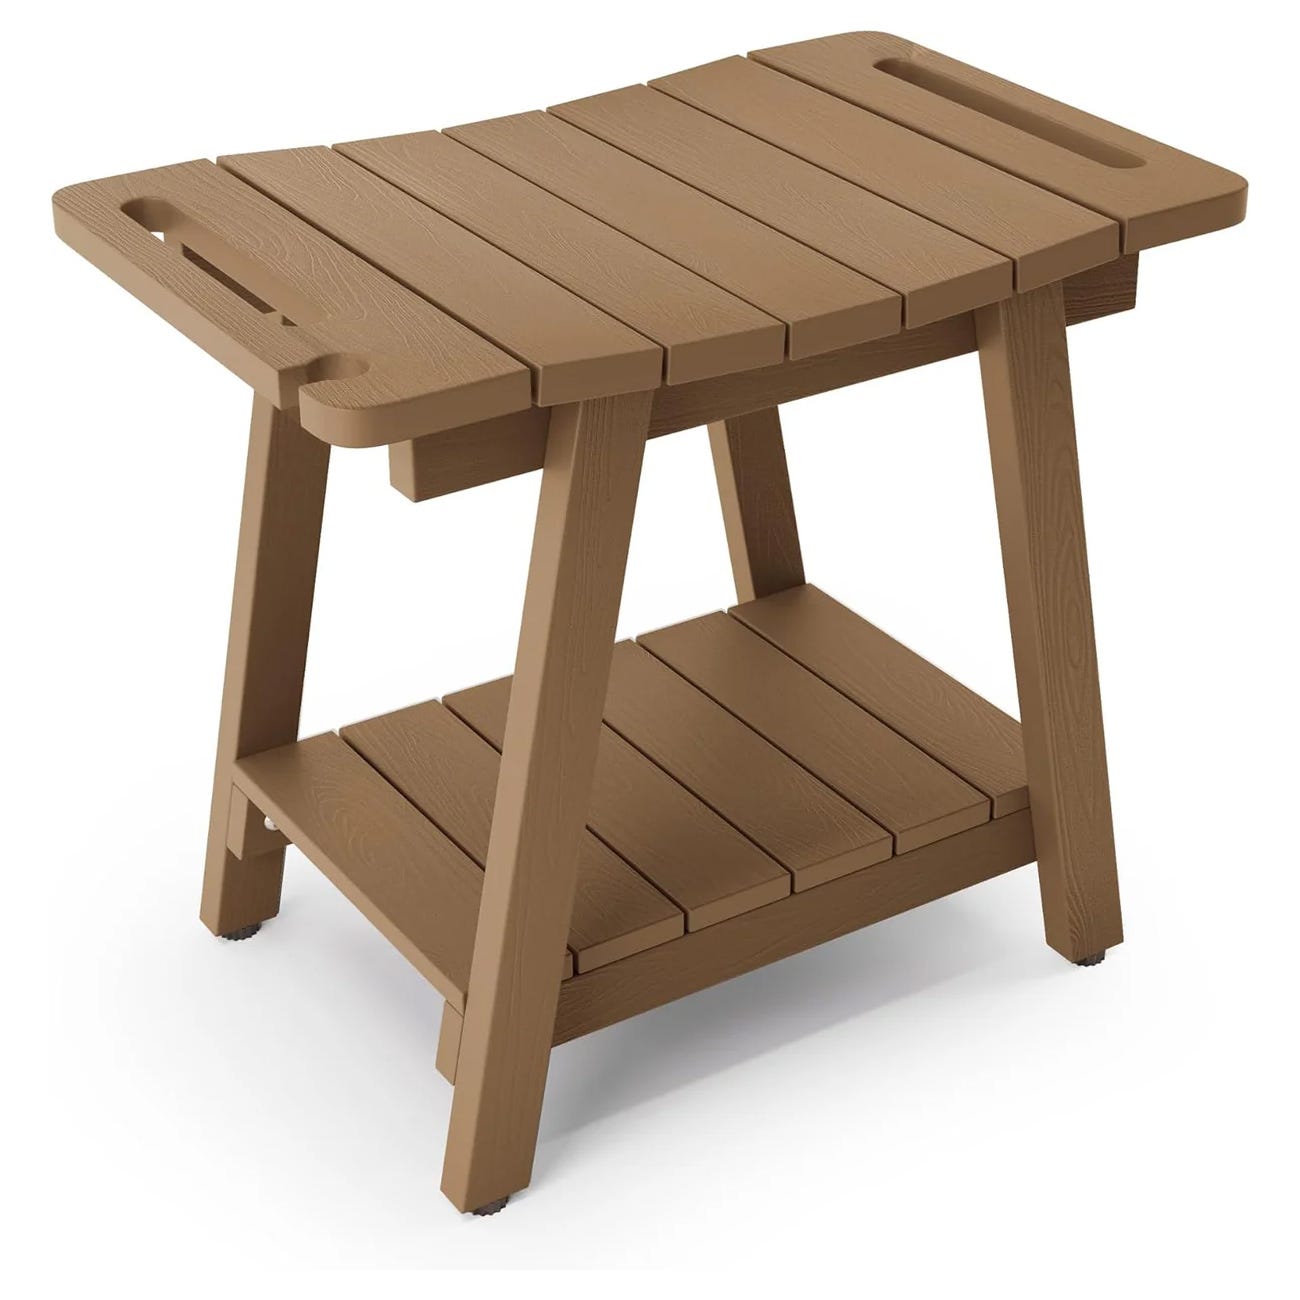 Brown plastic step stool with two steps and a handle slot on top.